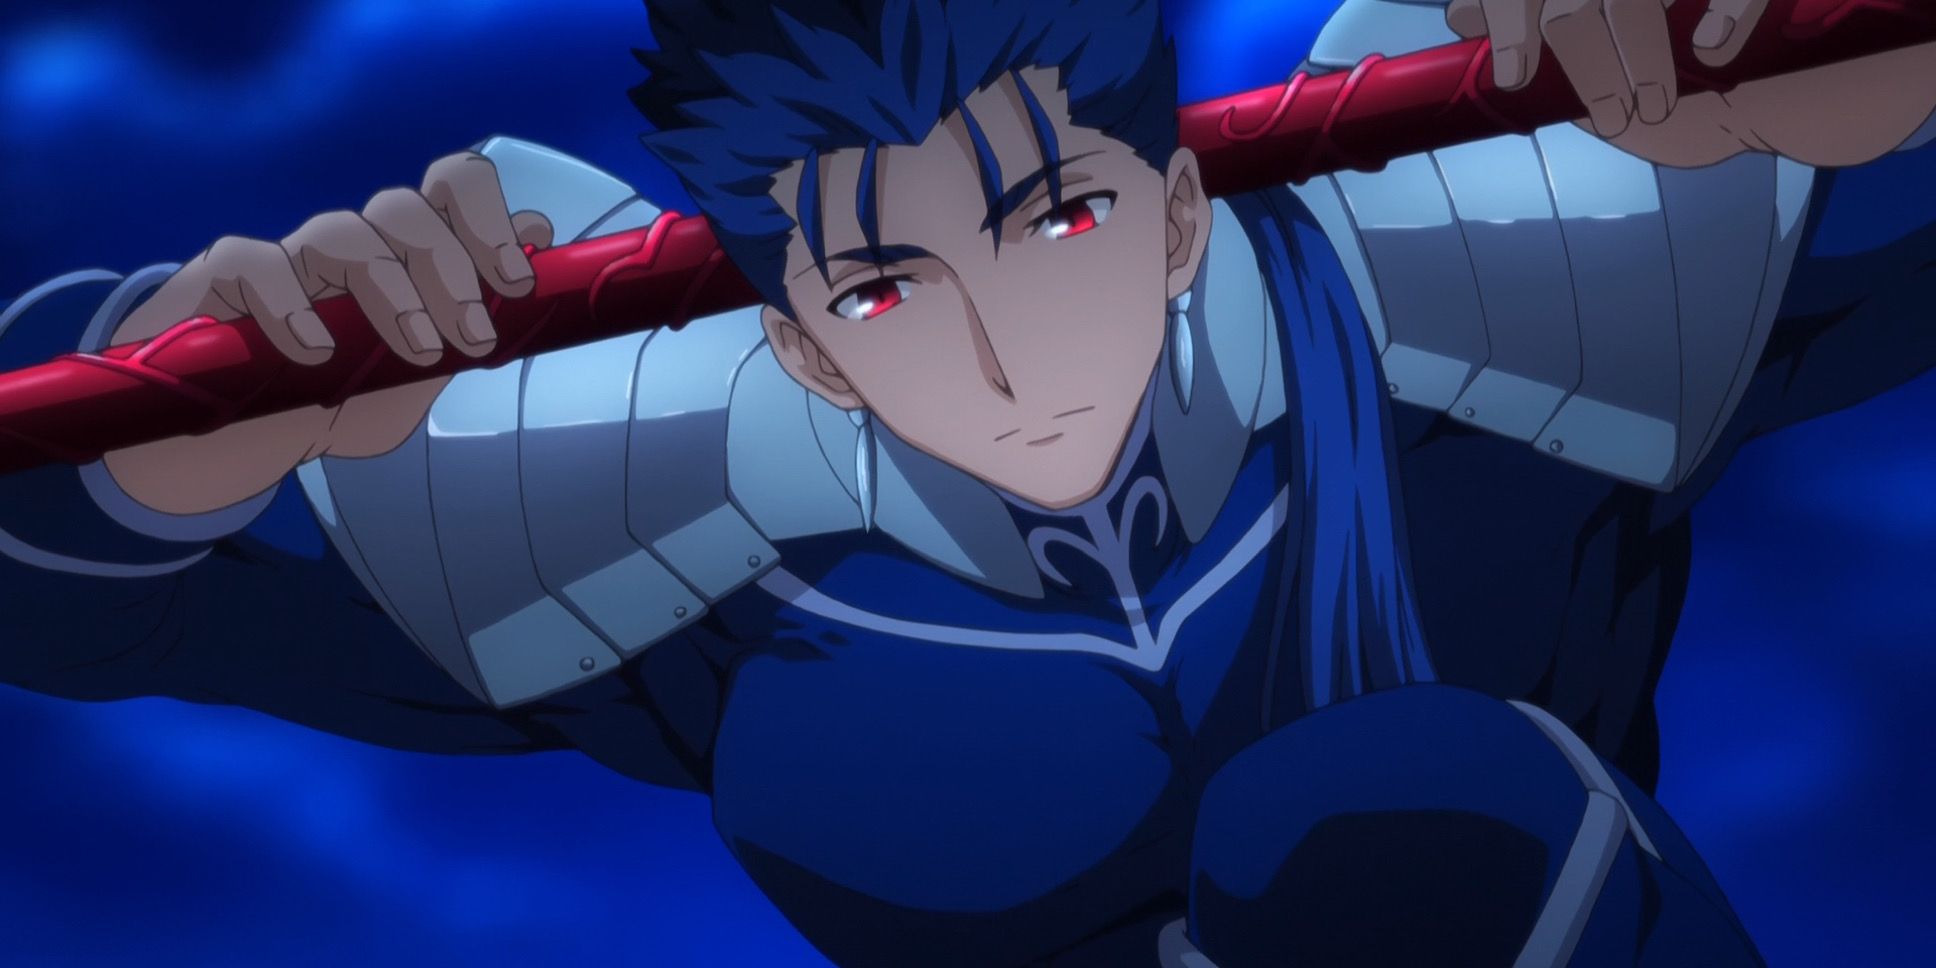 Lancer in Fate/Stay Night looking nonchalant